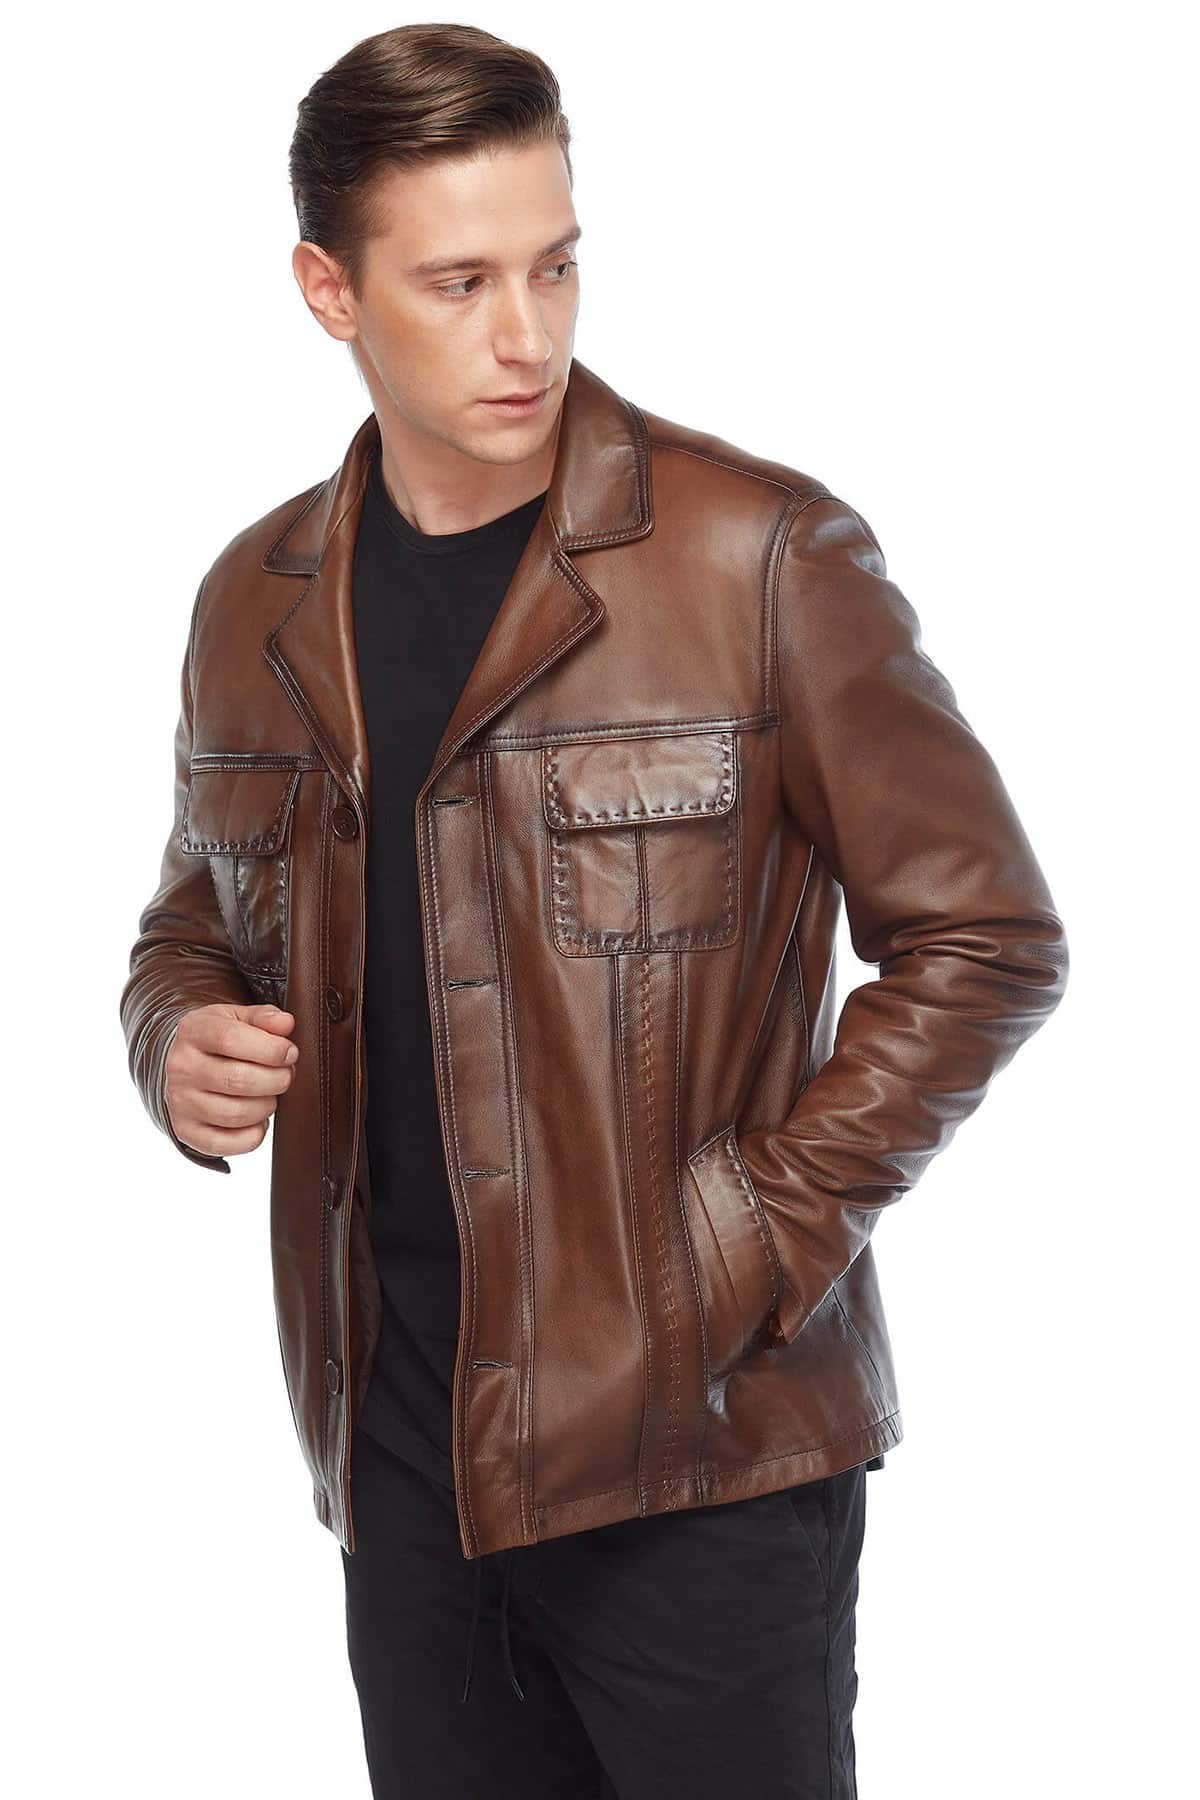 Charley Speed Men’s Leather Coat Brown Pose